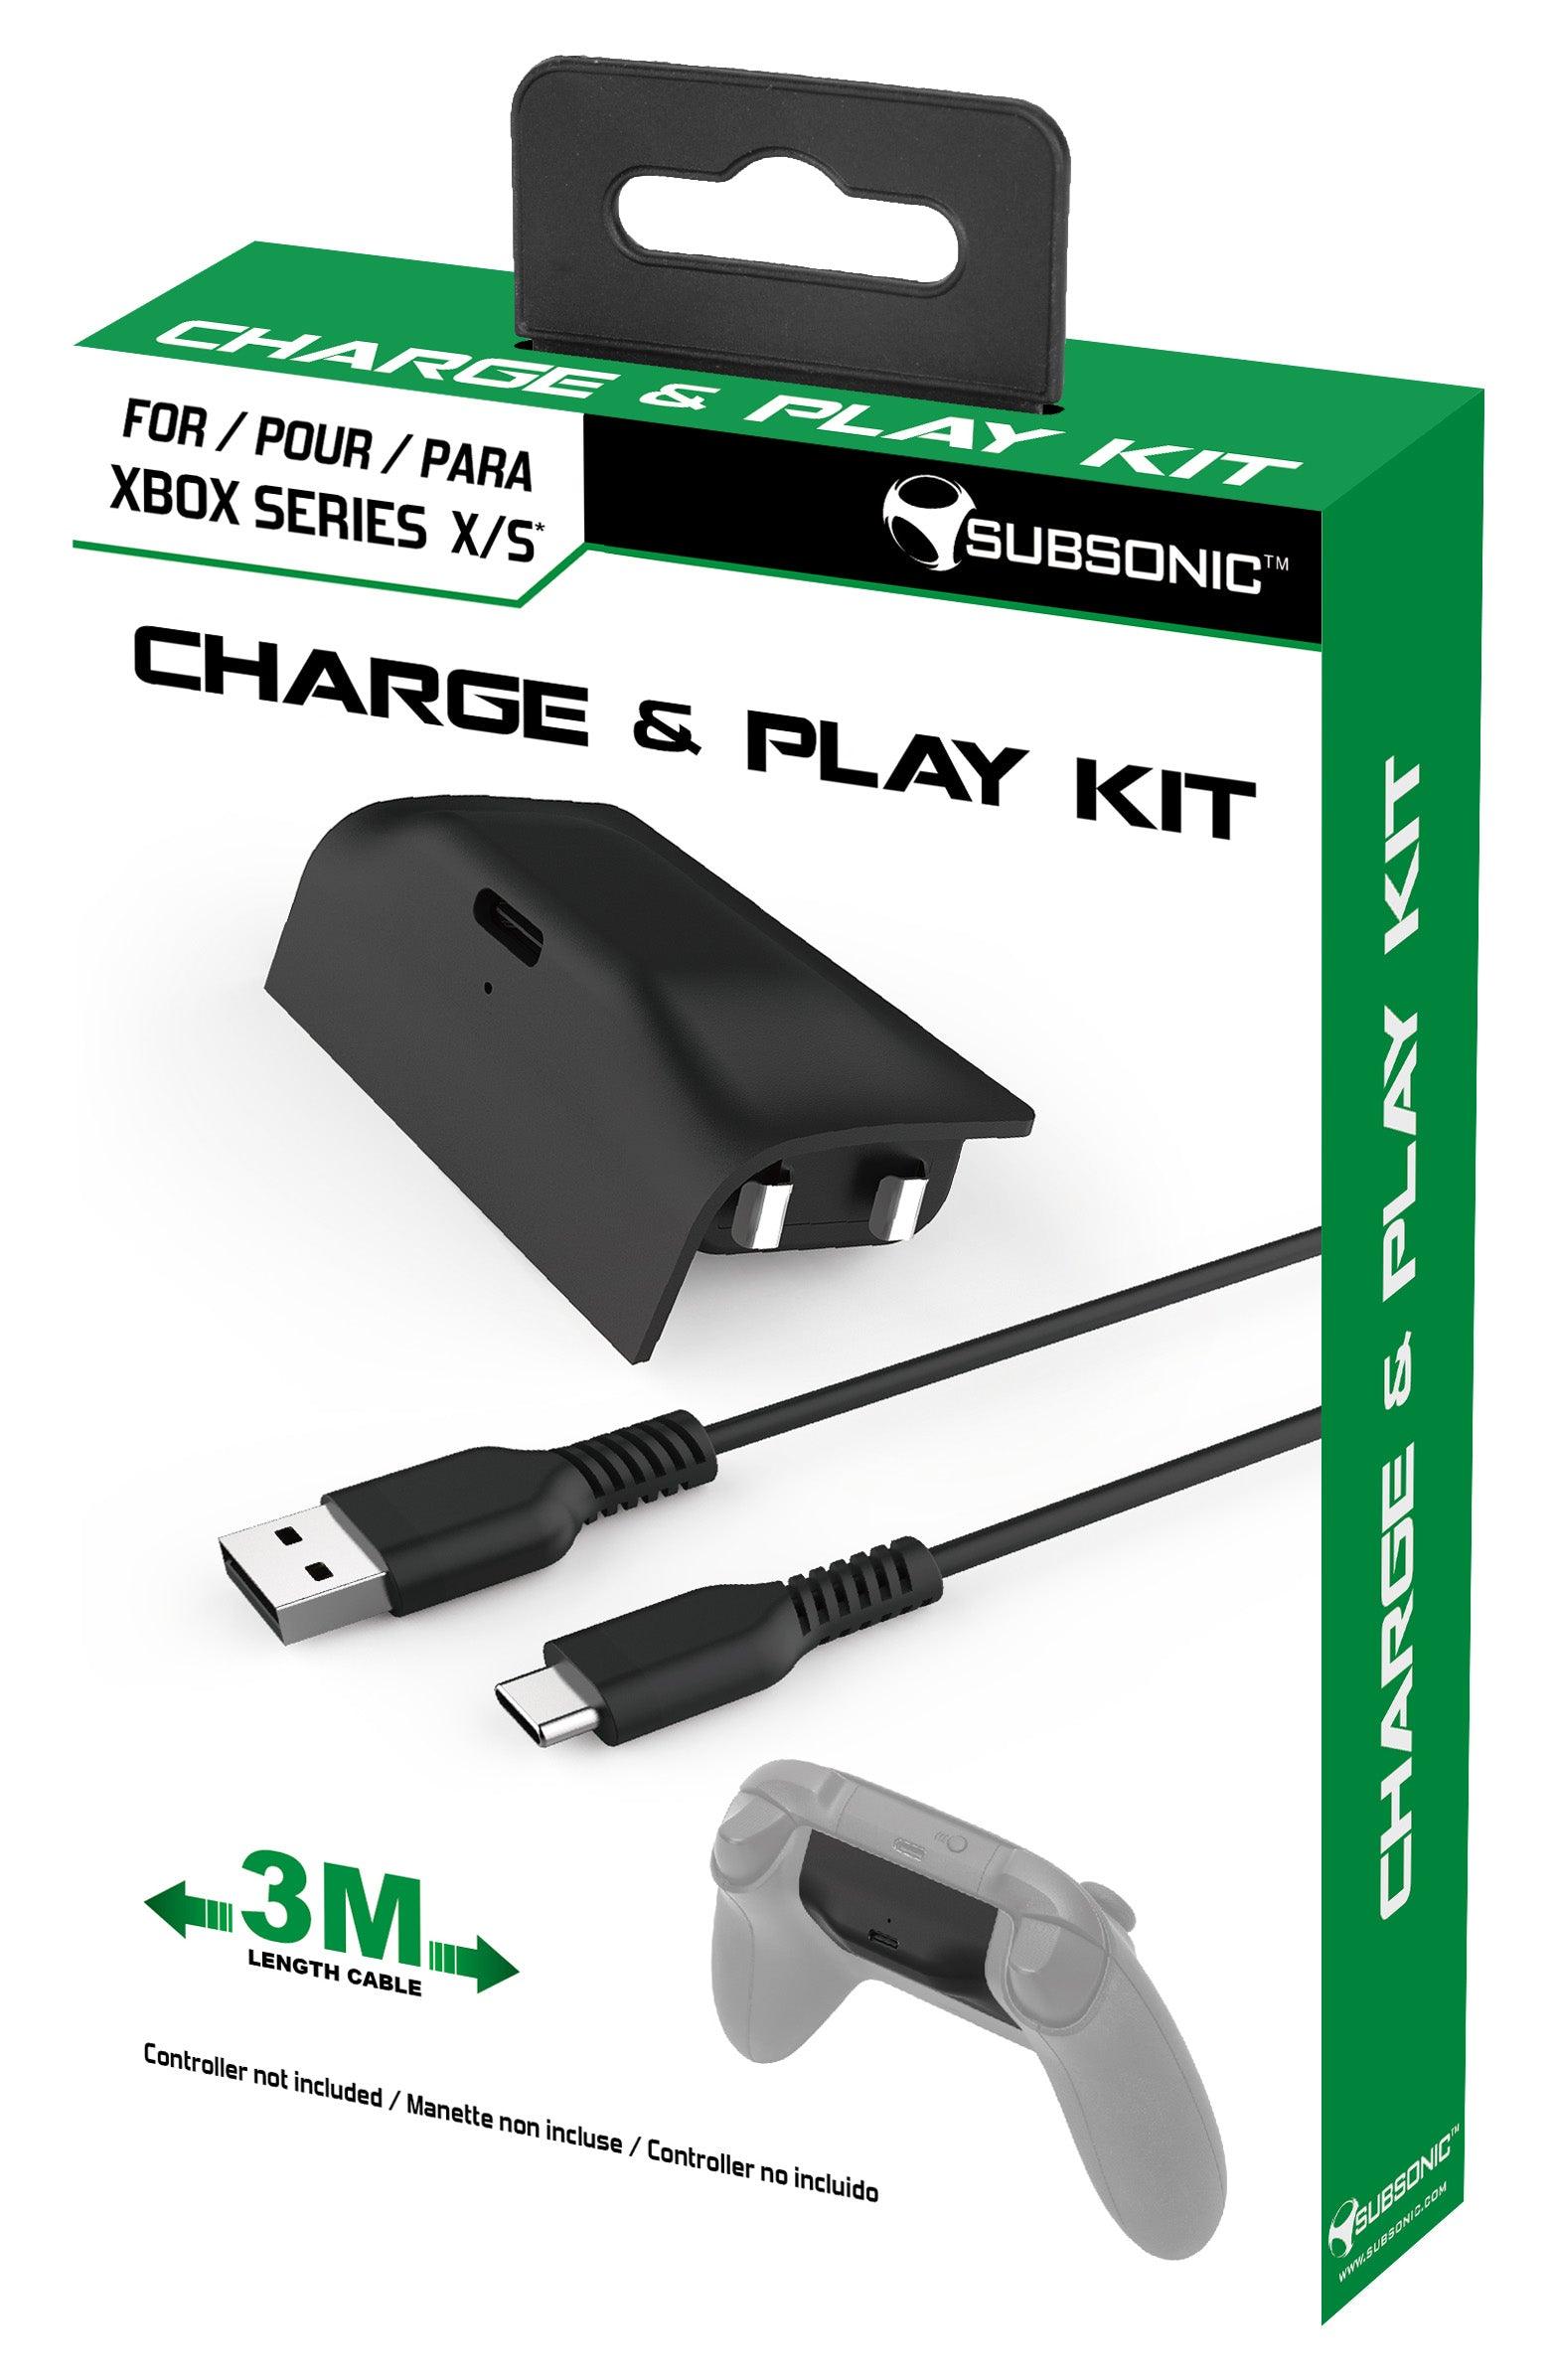 Charge & Play Kit - Want a New Gadget